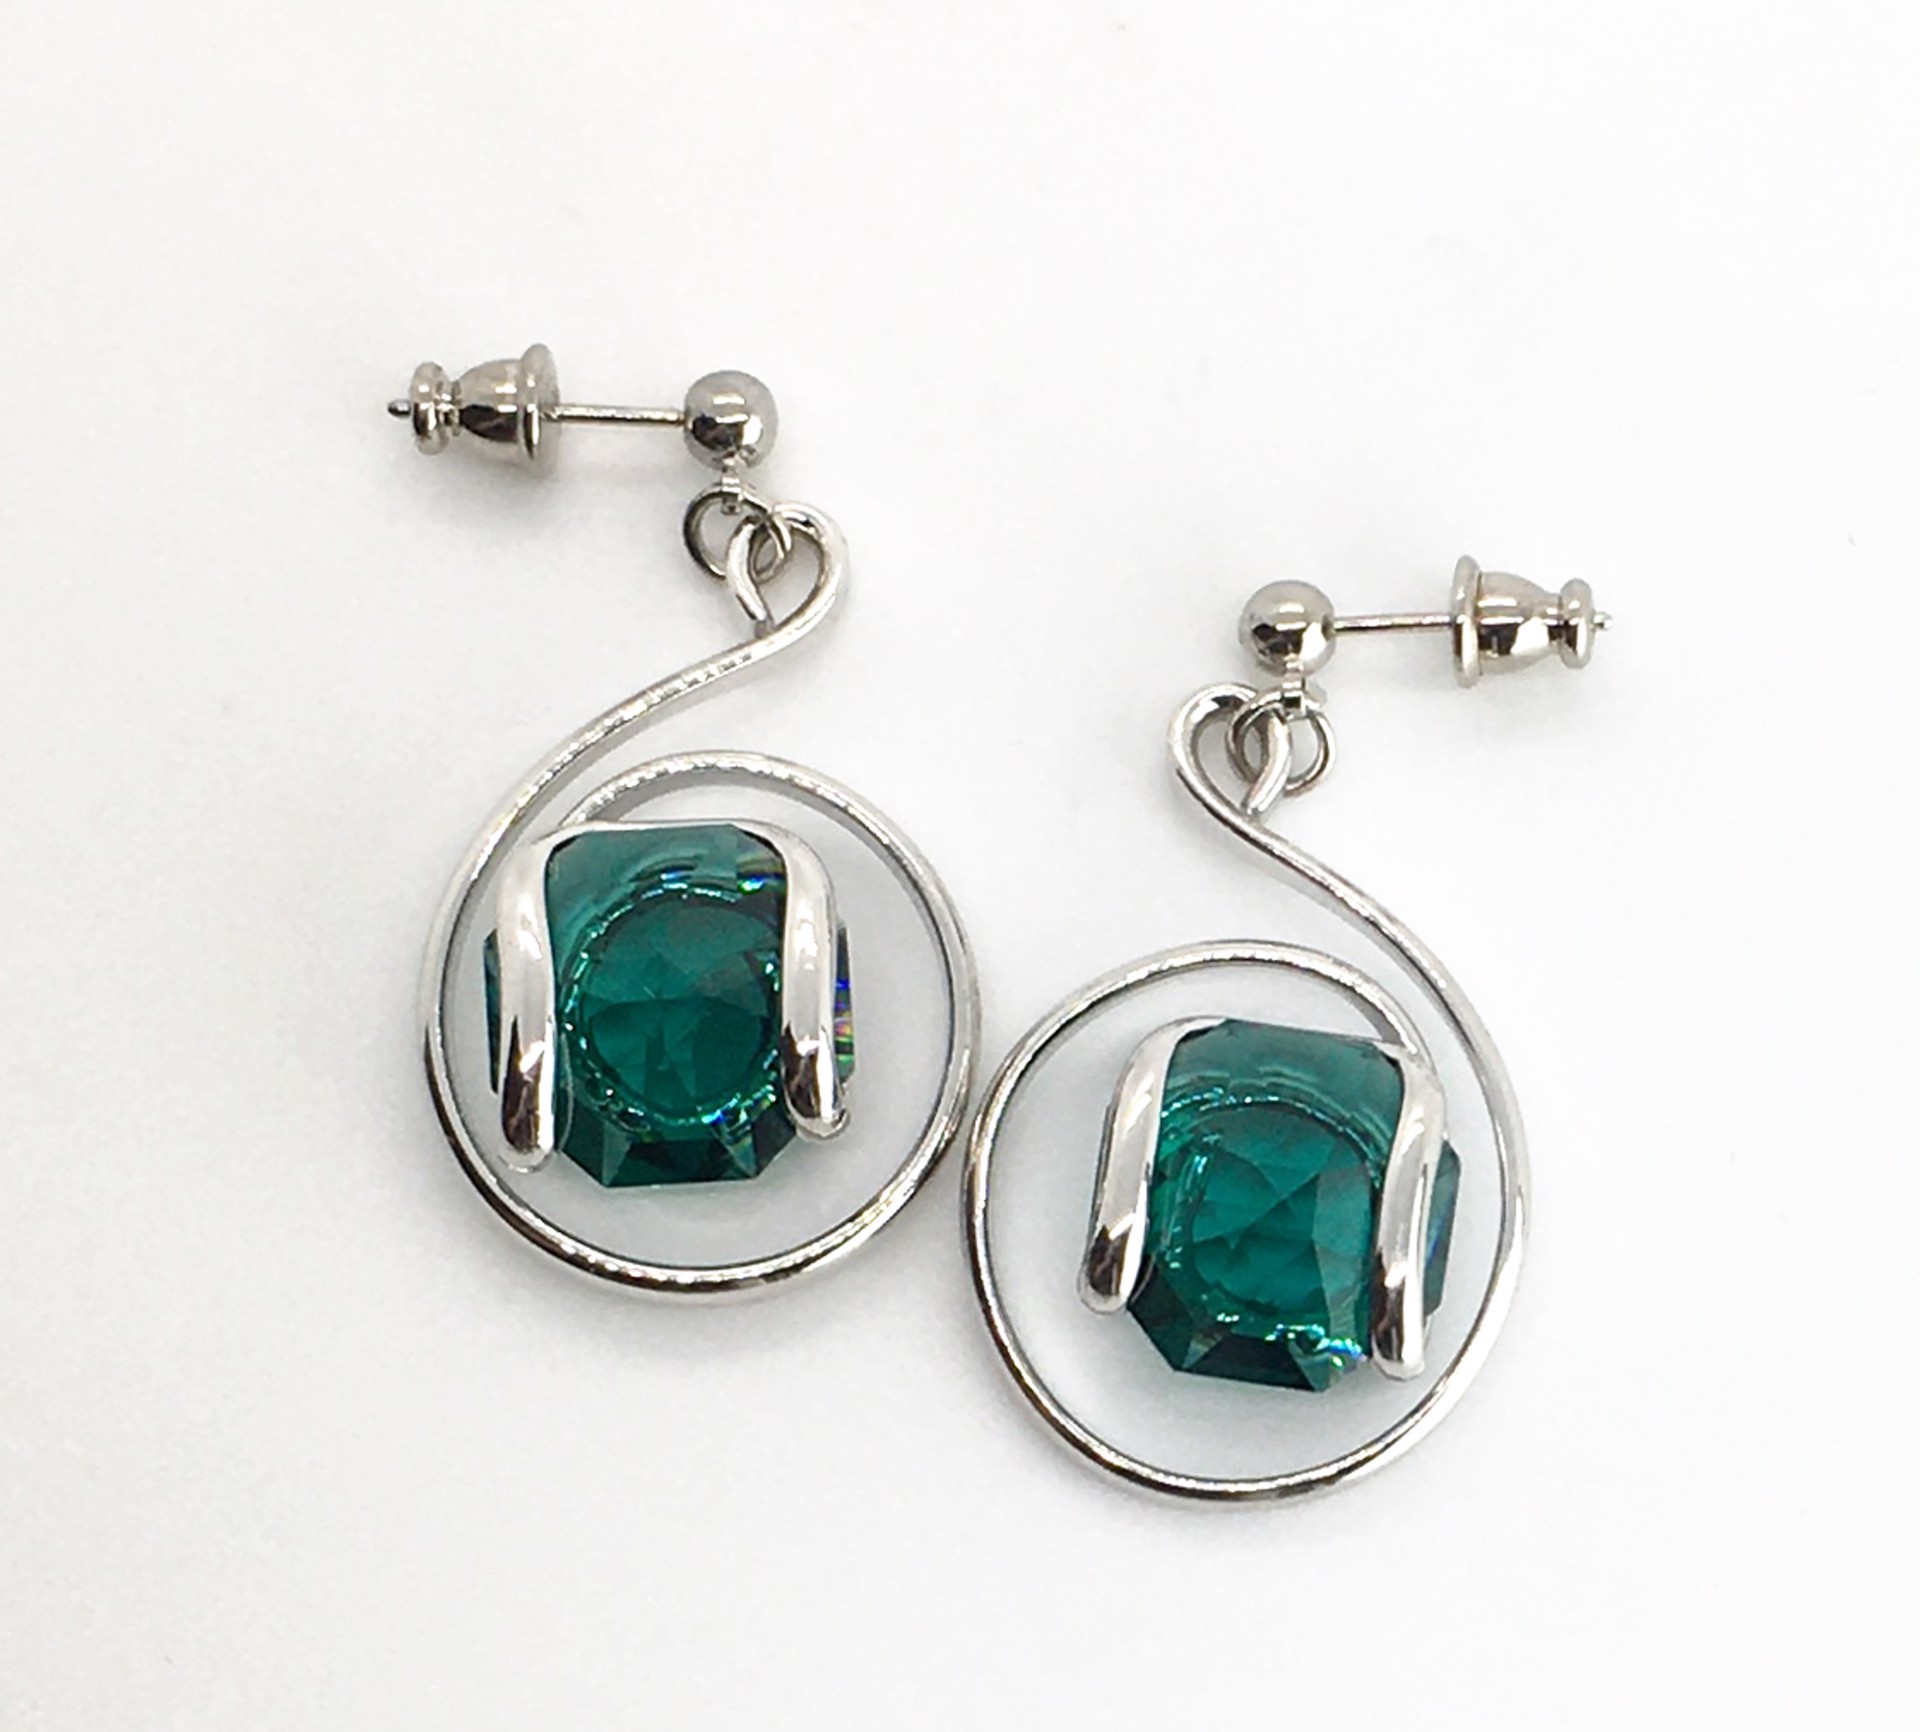 Earrings ~ Emerald Green Austrian Swarovski Crystal ~ Mixed Metals Triple Coated with Rhodium ~ Handmade  Setting by Monique Touber